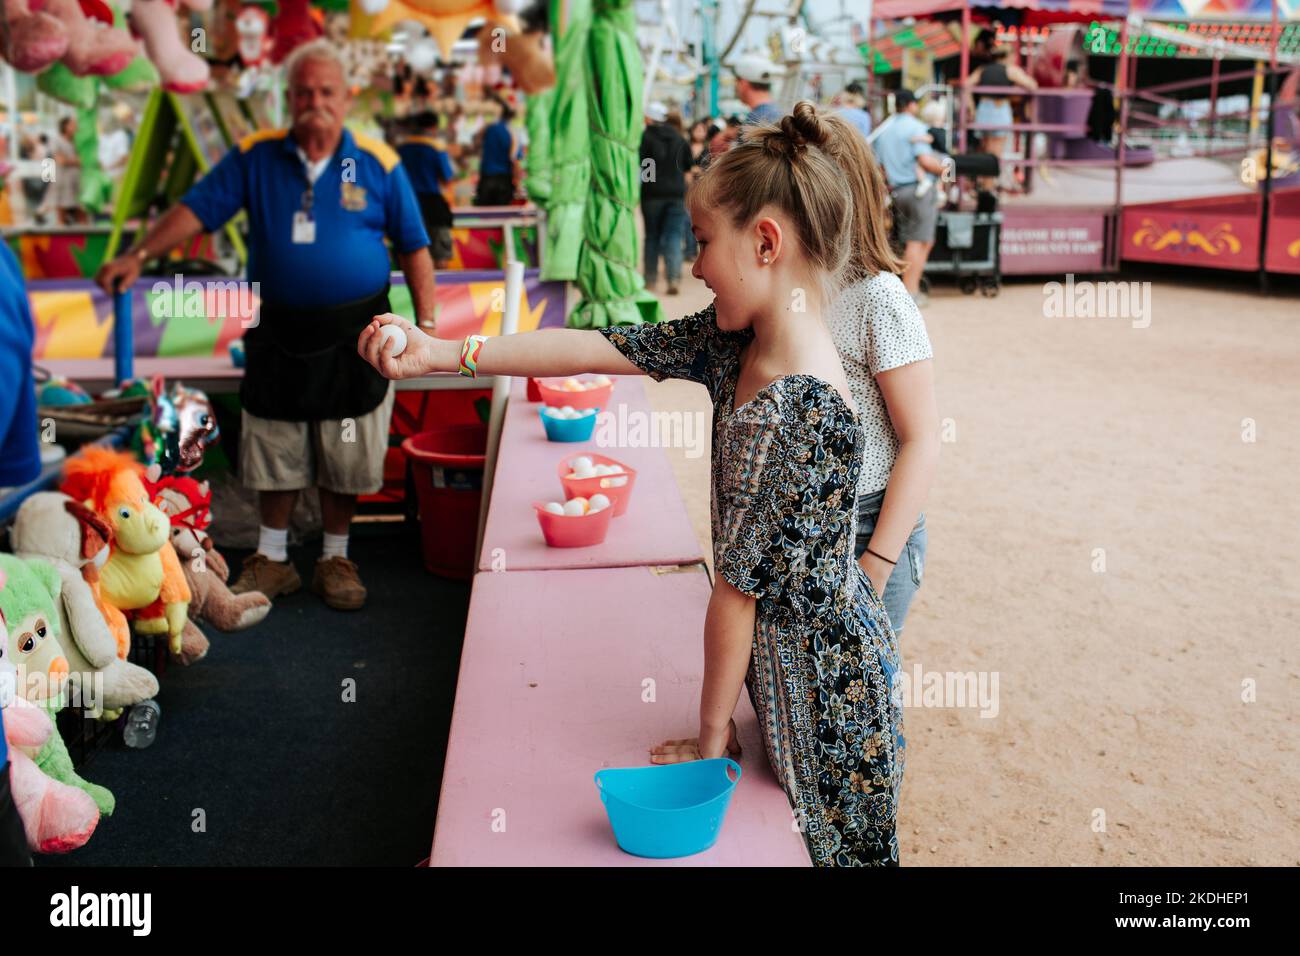 Young girl playing a game at a carnival Stock Photo